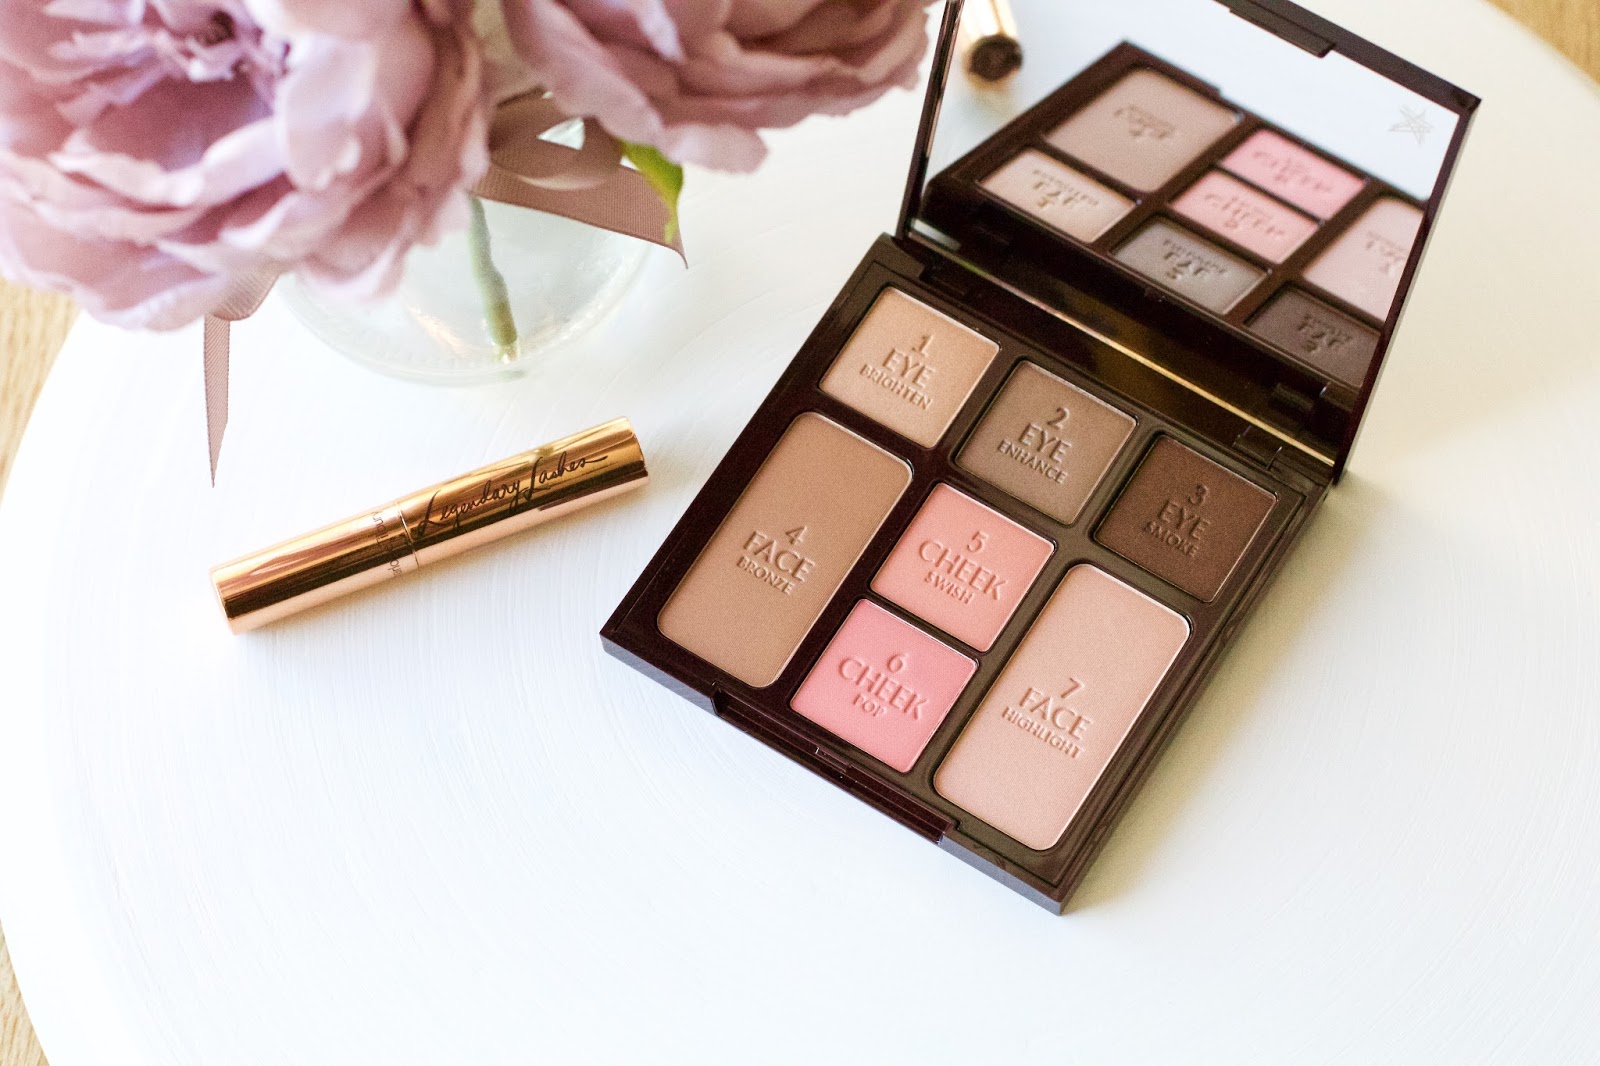 Charlotte Tilbury Instant Look In A Palette & Legendary Lashes Gift Set | The Lifestyle Archives